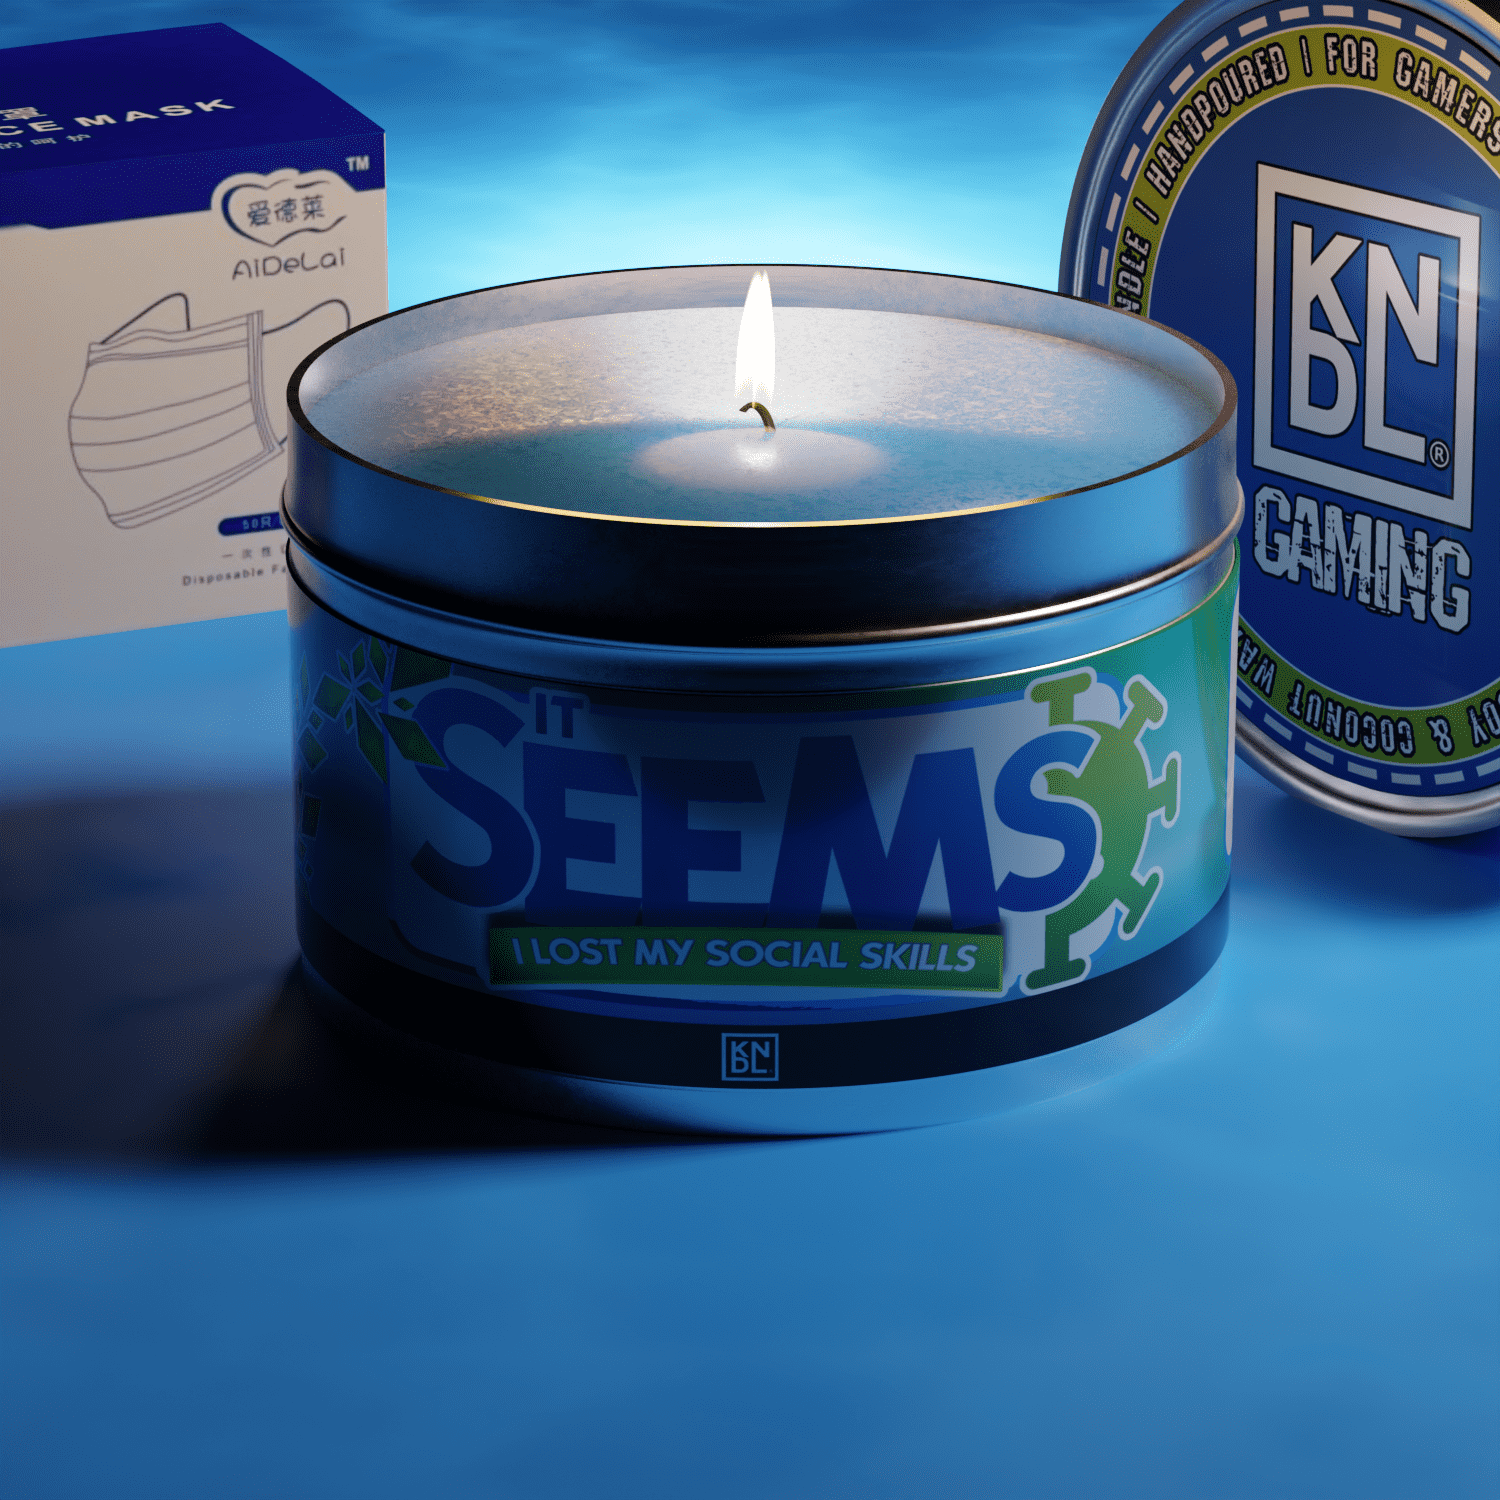 TIN NR 14 | IT SEEMS I LOST MY SOCIAL SKILLS | THE SIMS INSPIRED SCENTED CANDLE